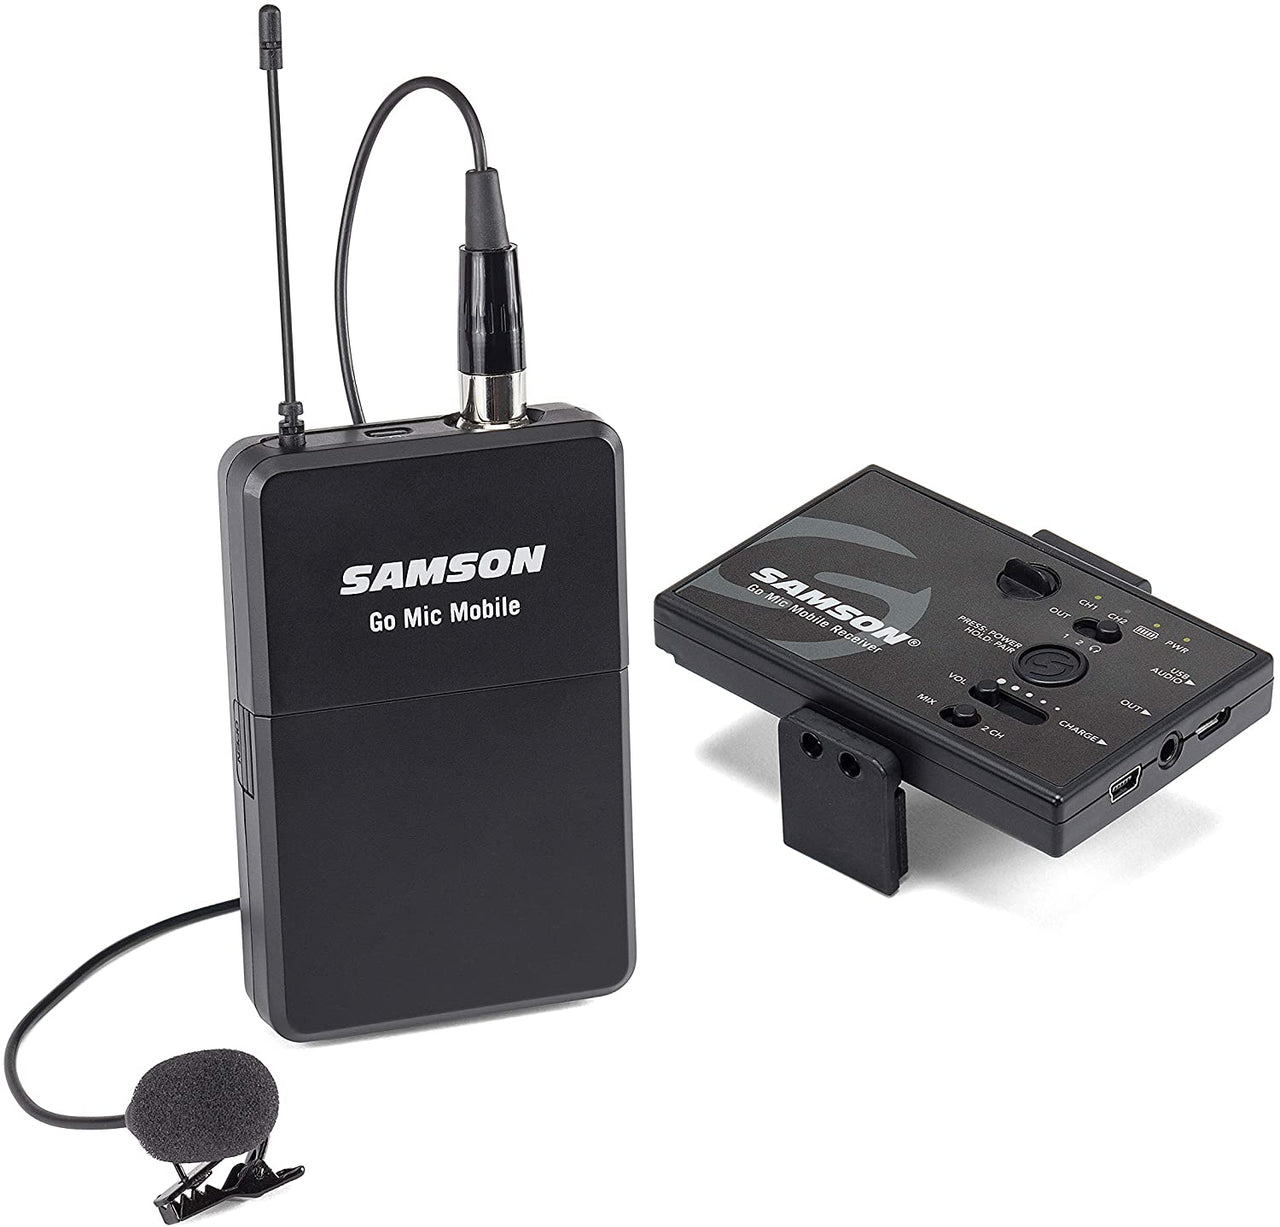 SAMSON Go Mic Mobile Professional Lavalier Wireless System for Mobile Video